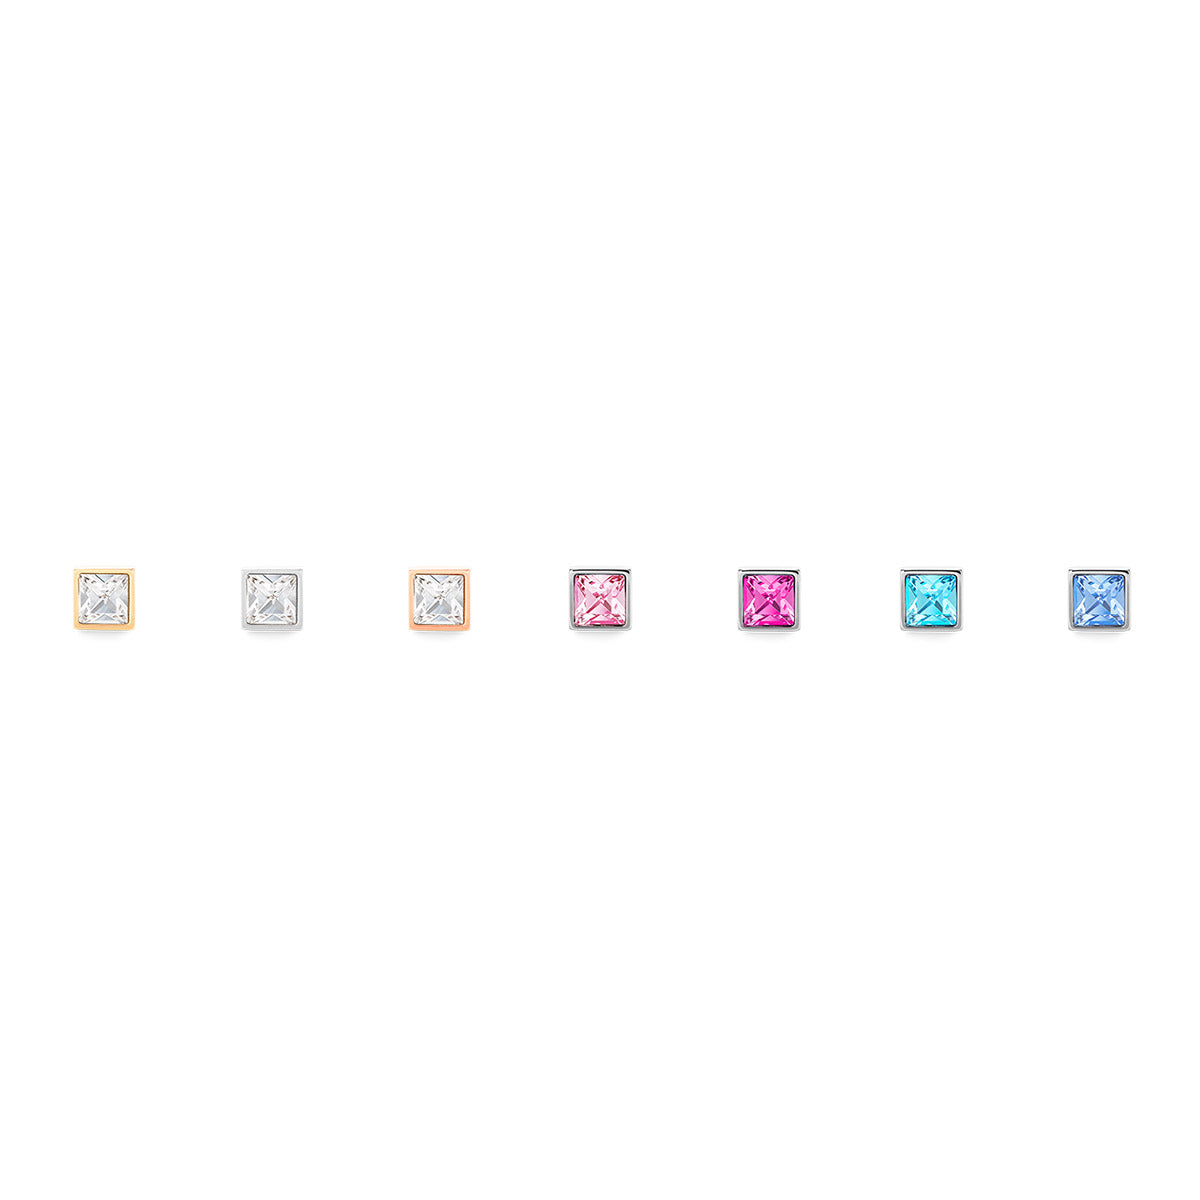 Brilliant Square Stud Earrings with Crystals 0500/21_1917 - Rose